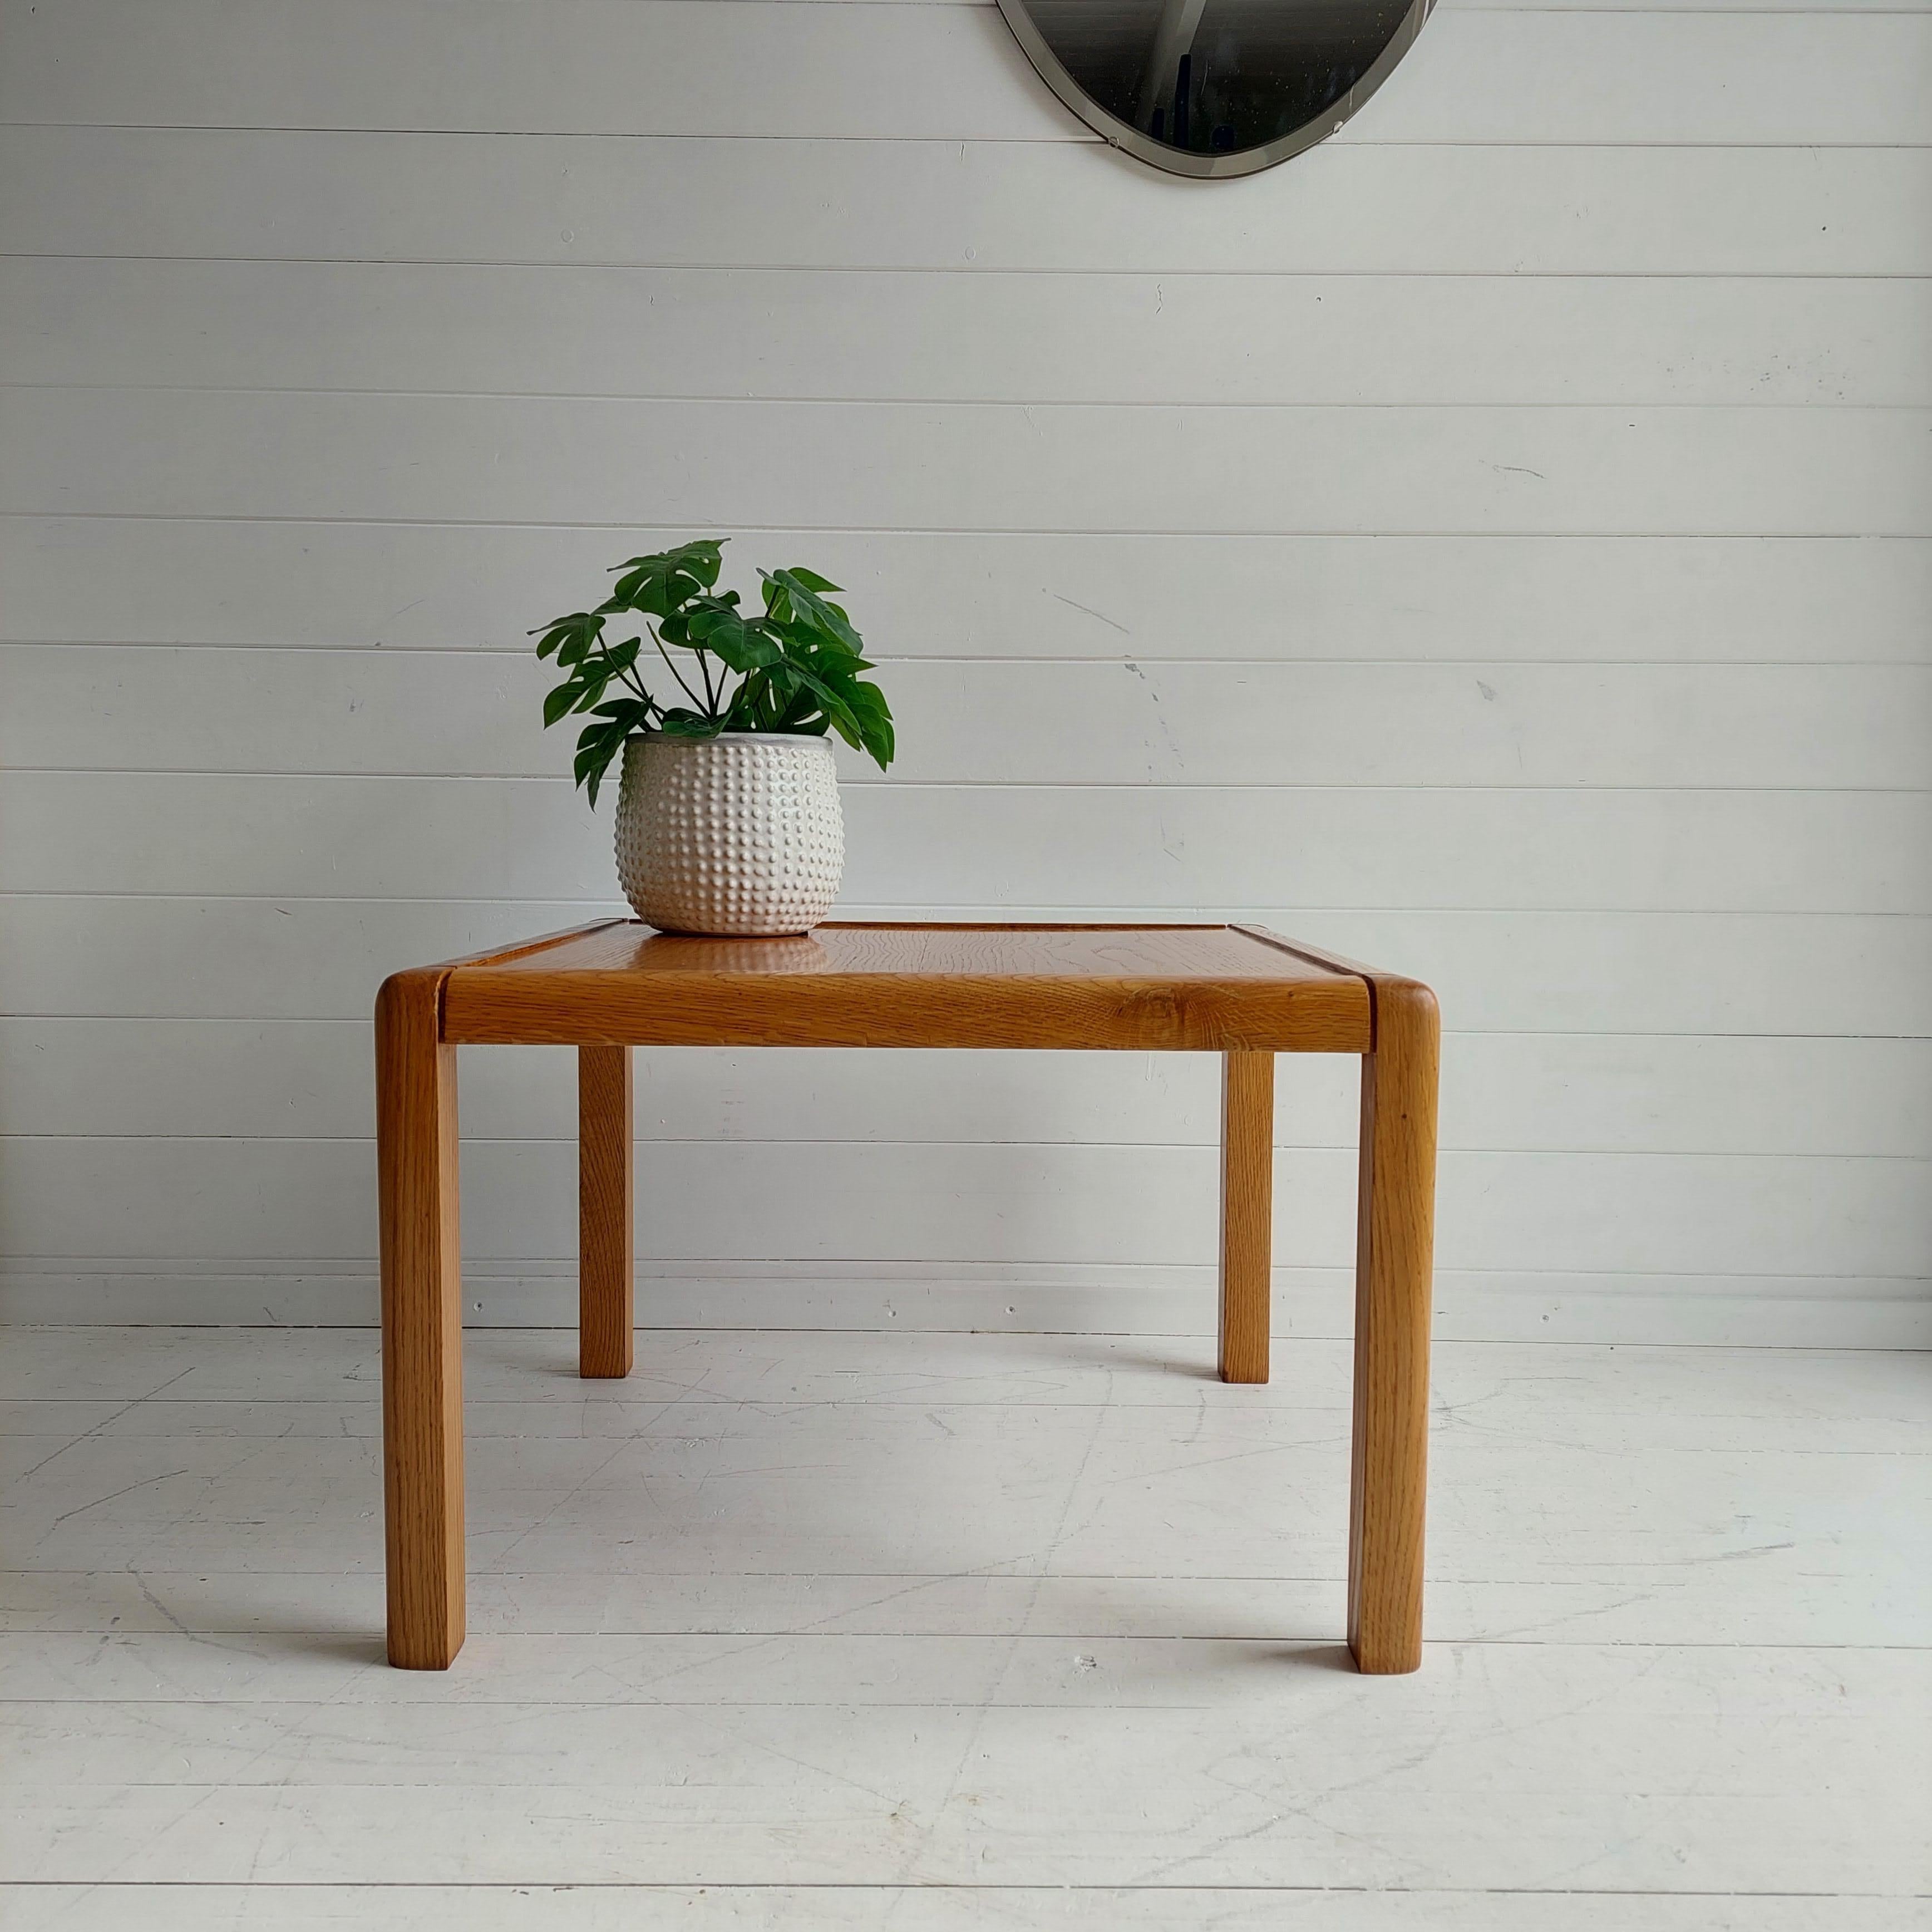 Coffee or side/end table in oak in the styleof Bob Van Den Berghe for Van Den Berghe-Pauvers in Ghent, Belgium. or either Poul H. Poulsen for Gangsø Møbler
Circa 1960s.

Perfectly simple. Just like that little black dress can go anywhere this